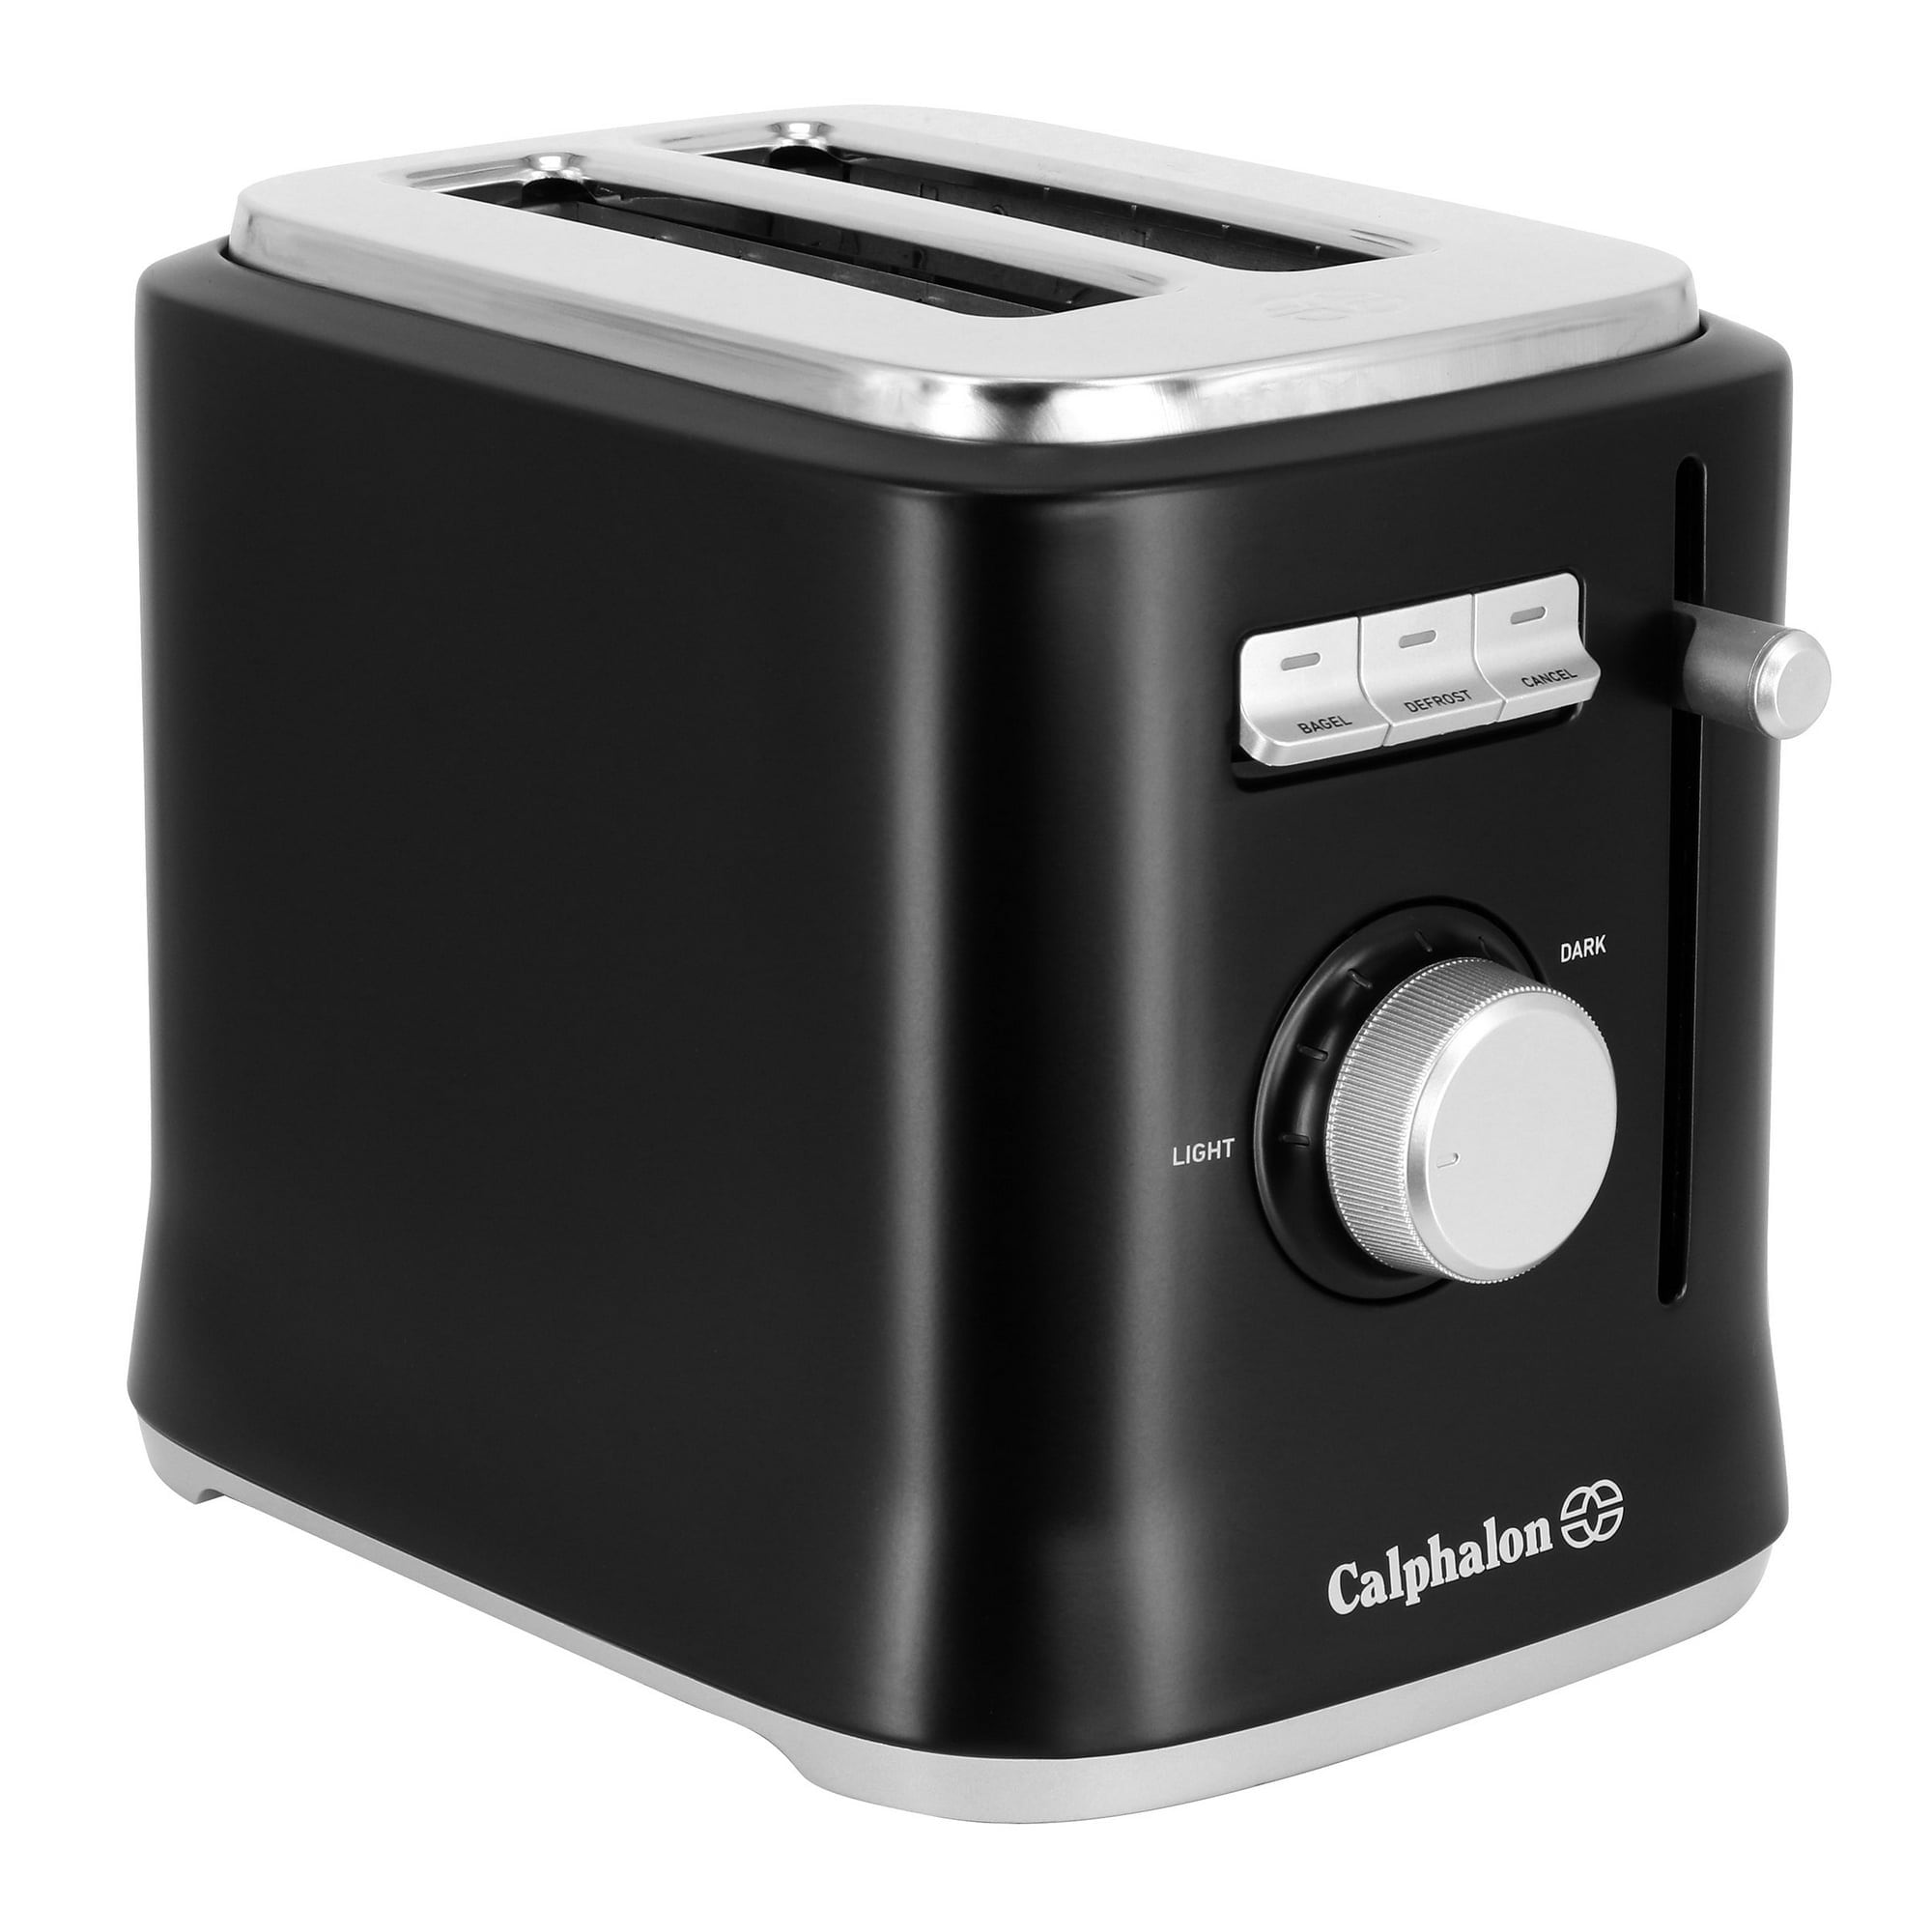 https://ak1.ostkcdn.com/images/products/is/images/direct/0338f79dd6ec2374d7153a8ca14100bffd1df492/Calphalon-Precision-Control-2-Slice-Toaster-with-6-Shade-Settings.jpg